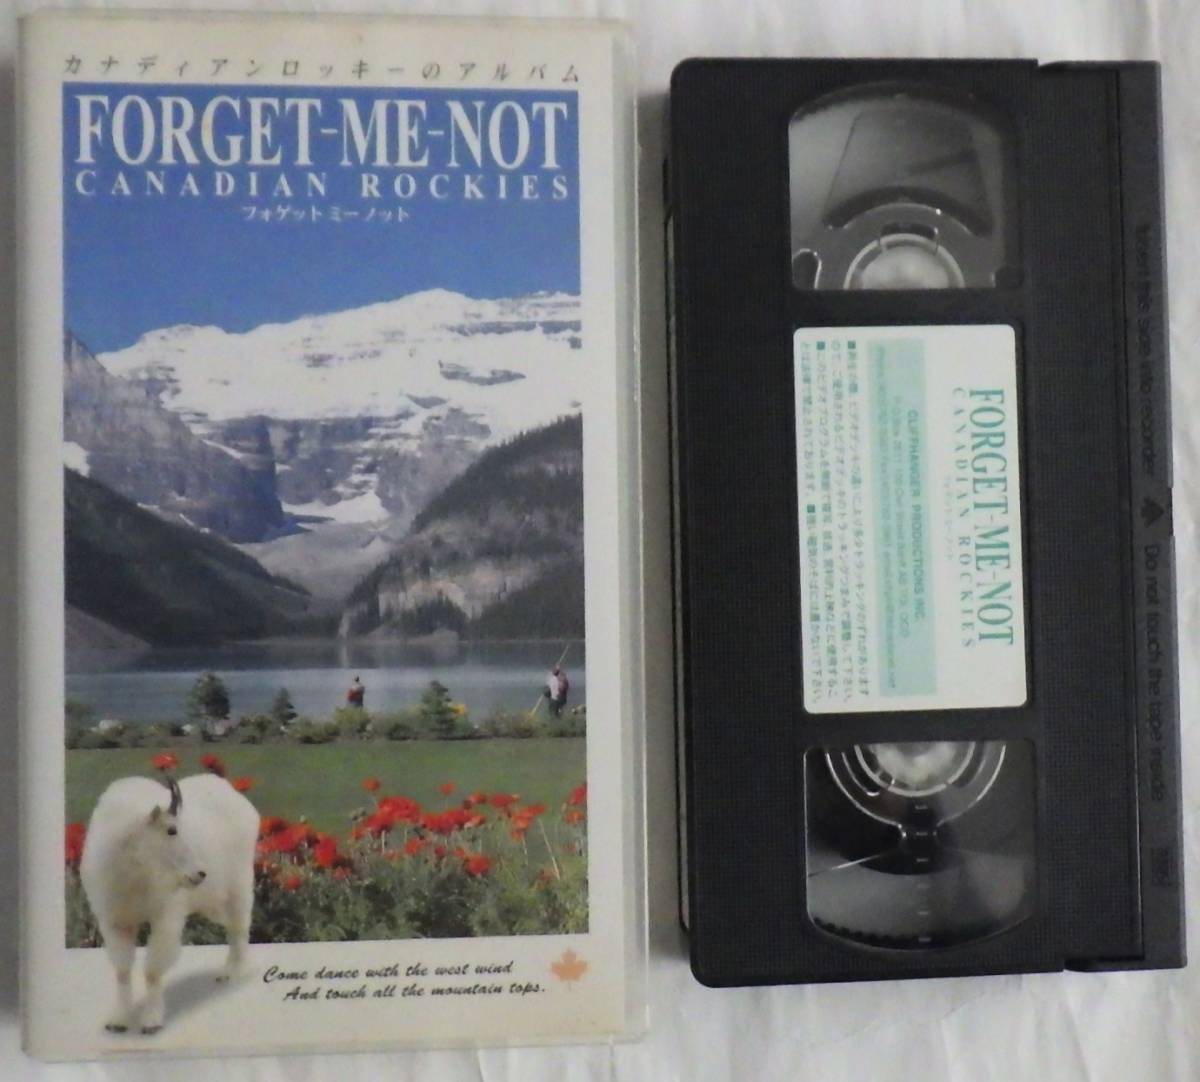 VHSビデオテープ　カナディアンロッキーのアルバム　FORGET-ME-NOT CANADIAN ROCKIES_画像2